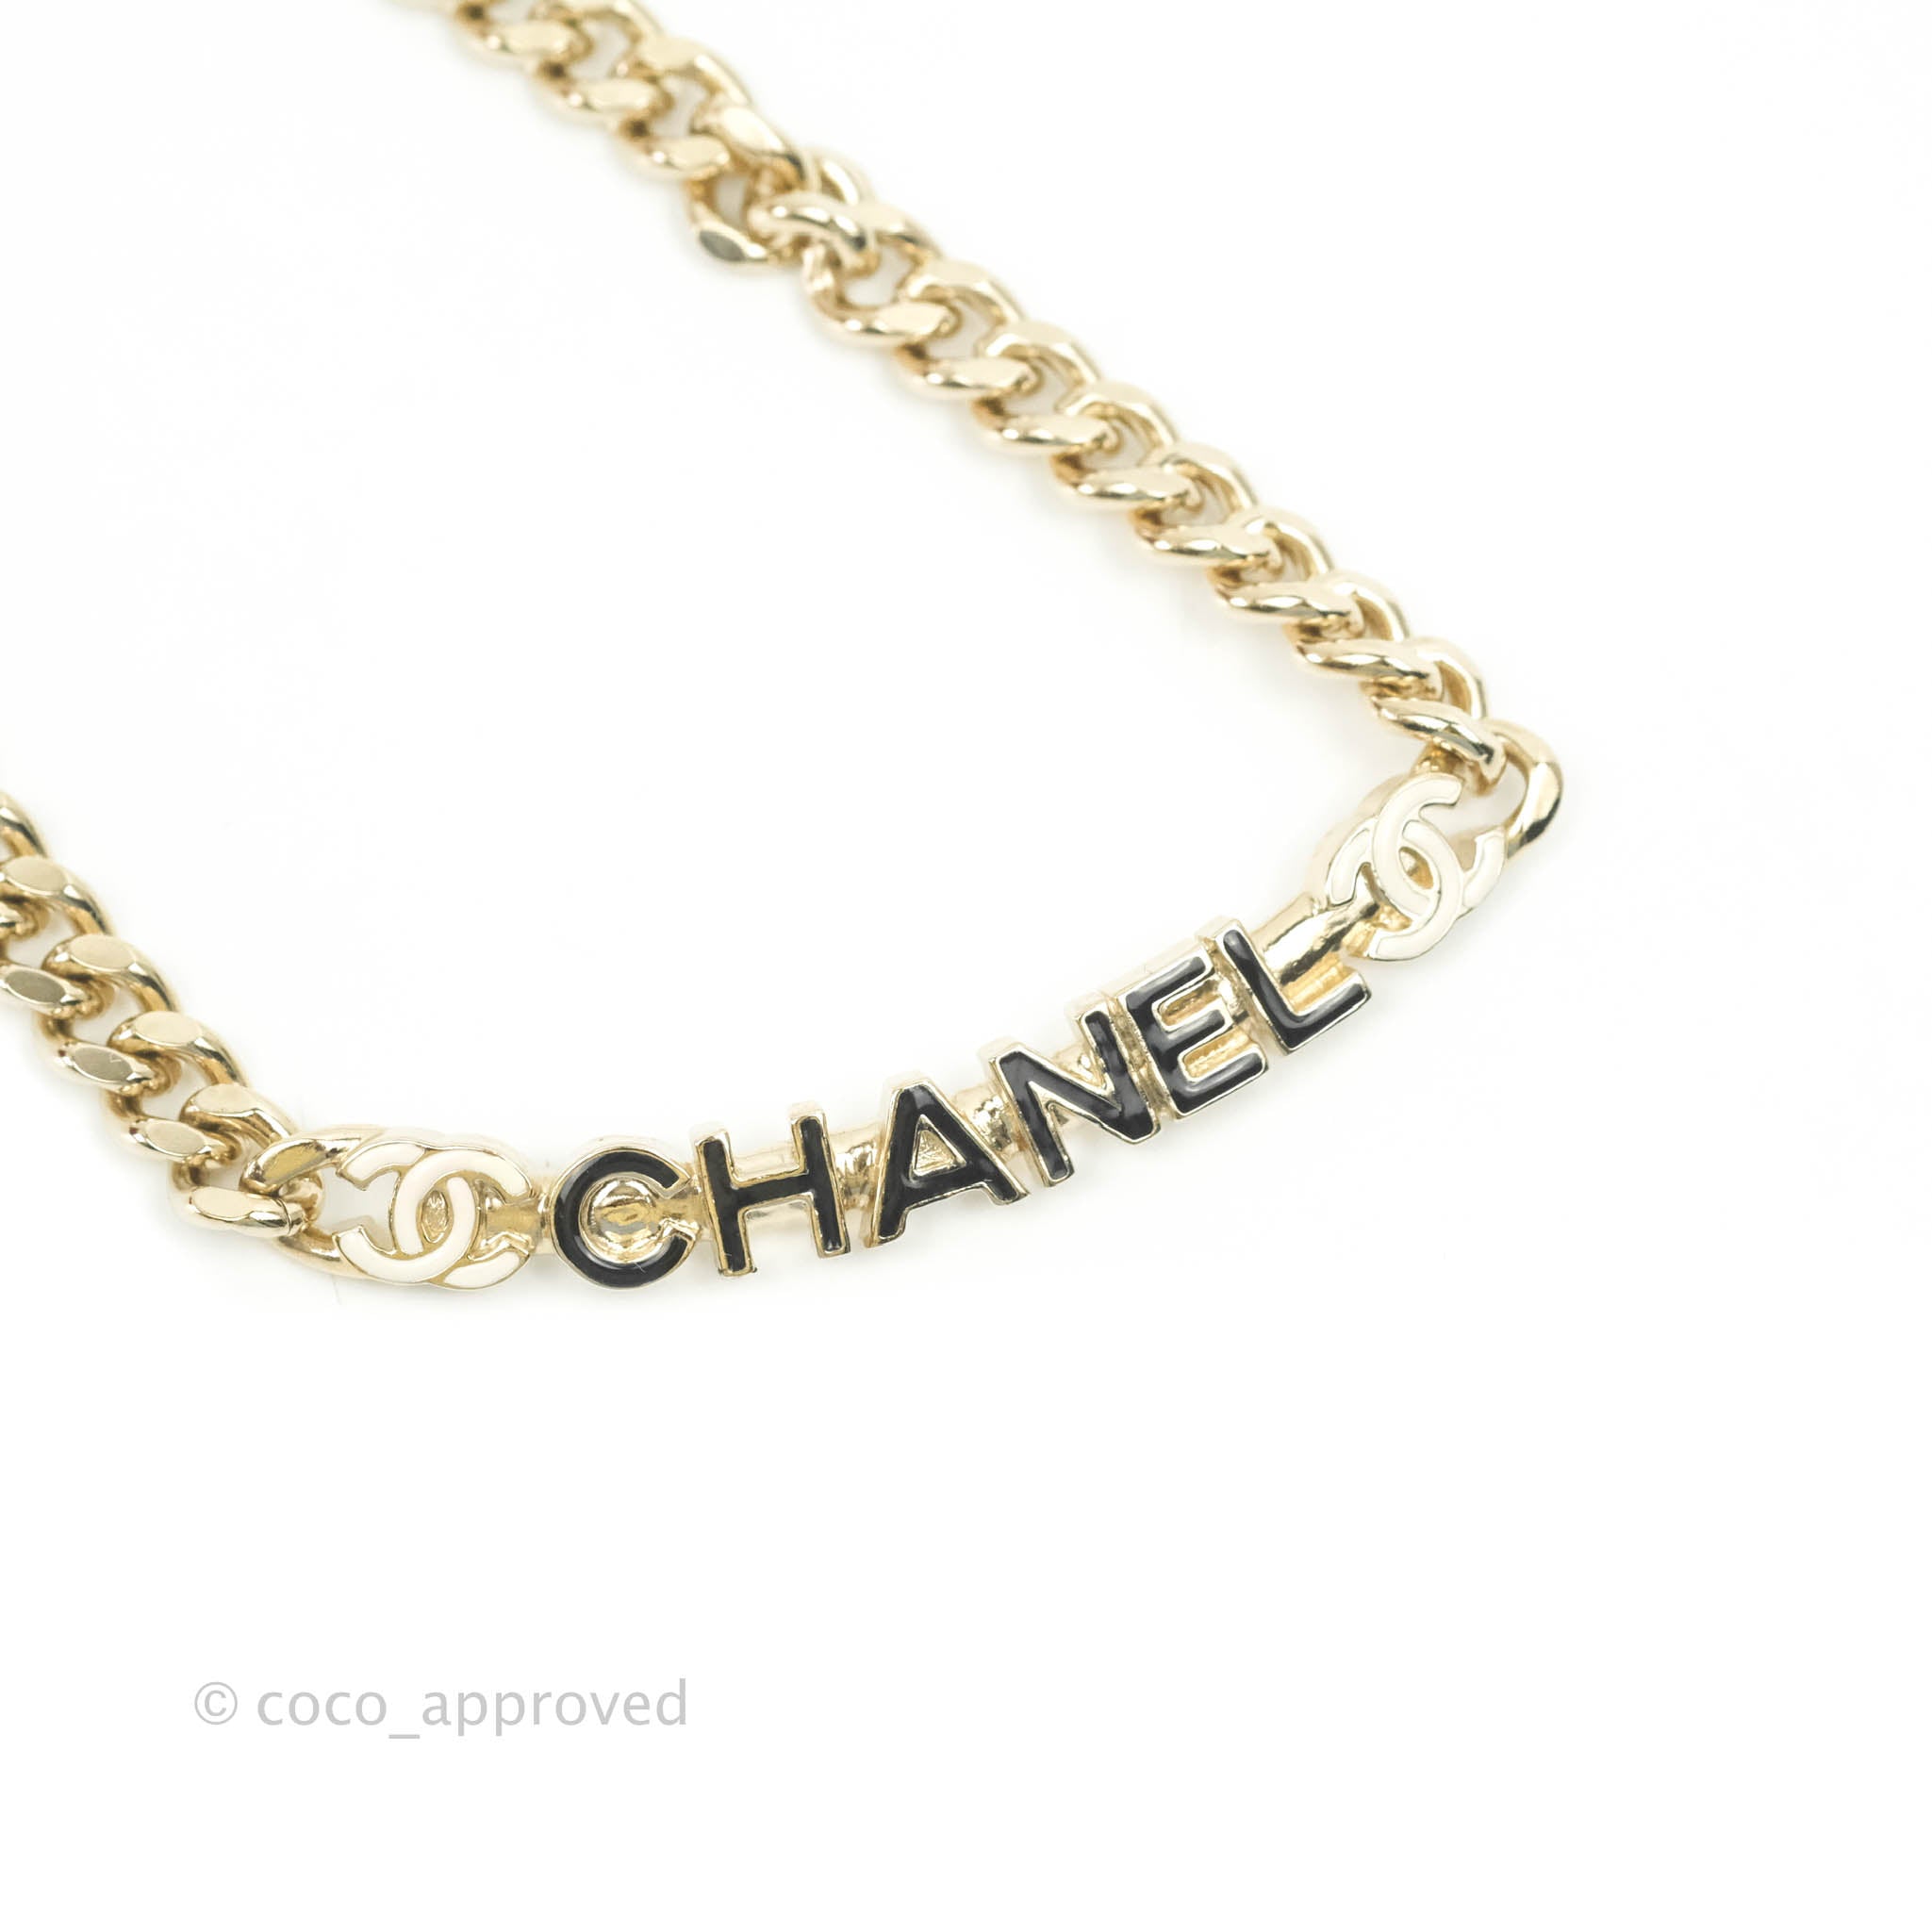 CHANEL, Jewelry, Chanel Pearl Cc Pendant Adjustable Necklace